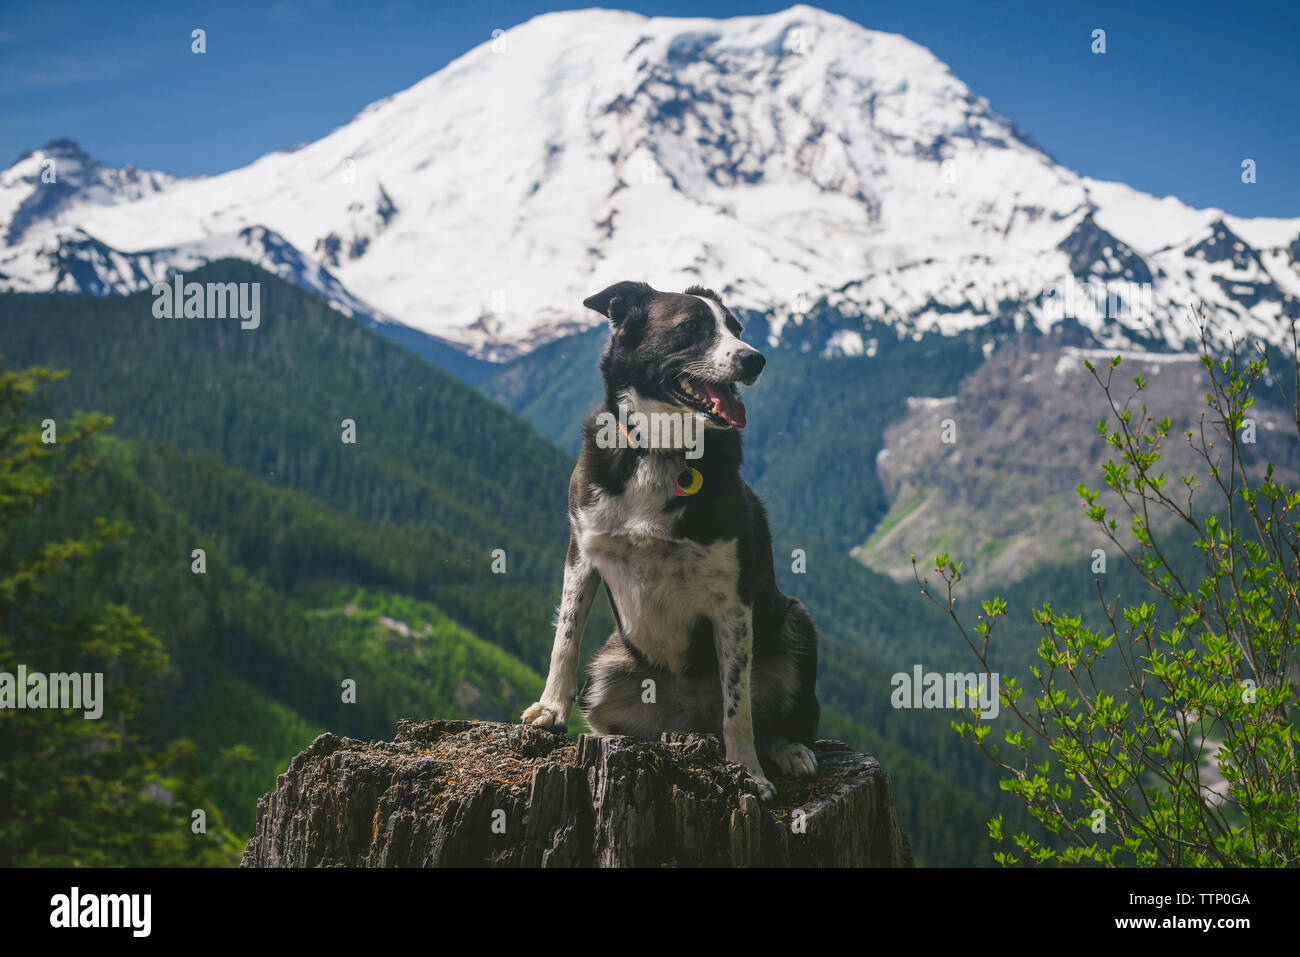 Dog looking away while sitting on tree stump against snowcapped mountains Stock Photo